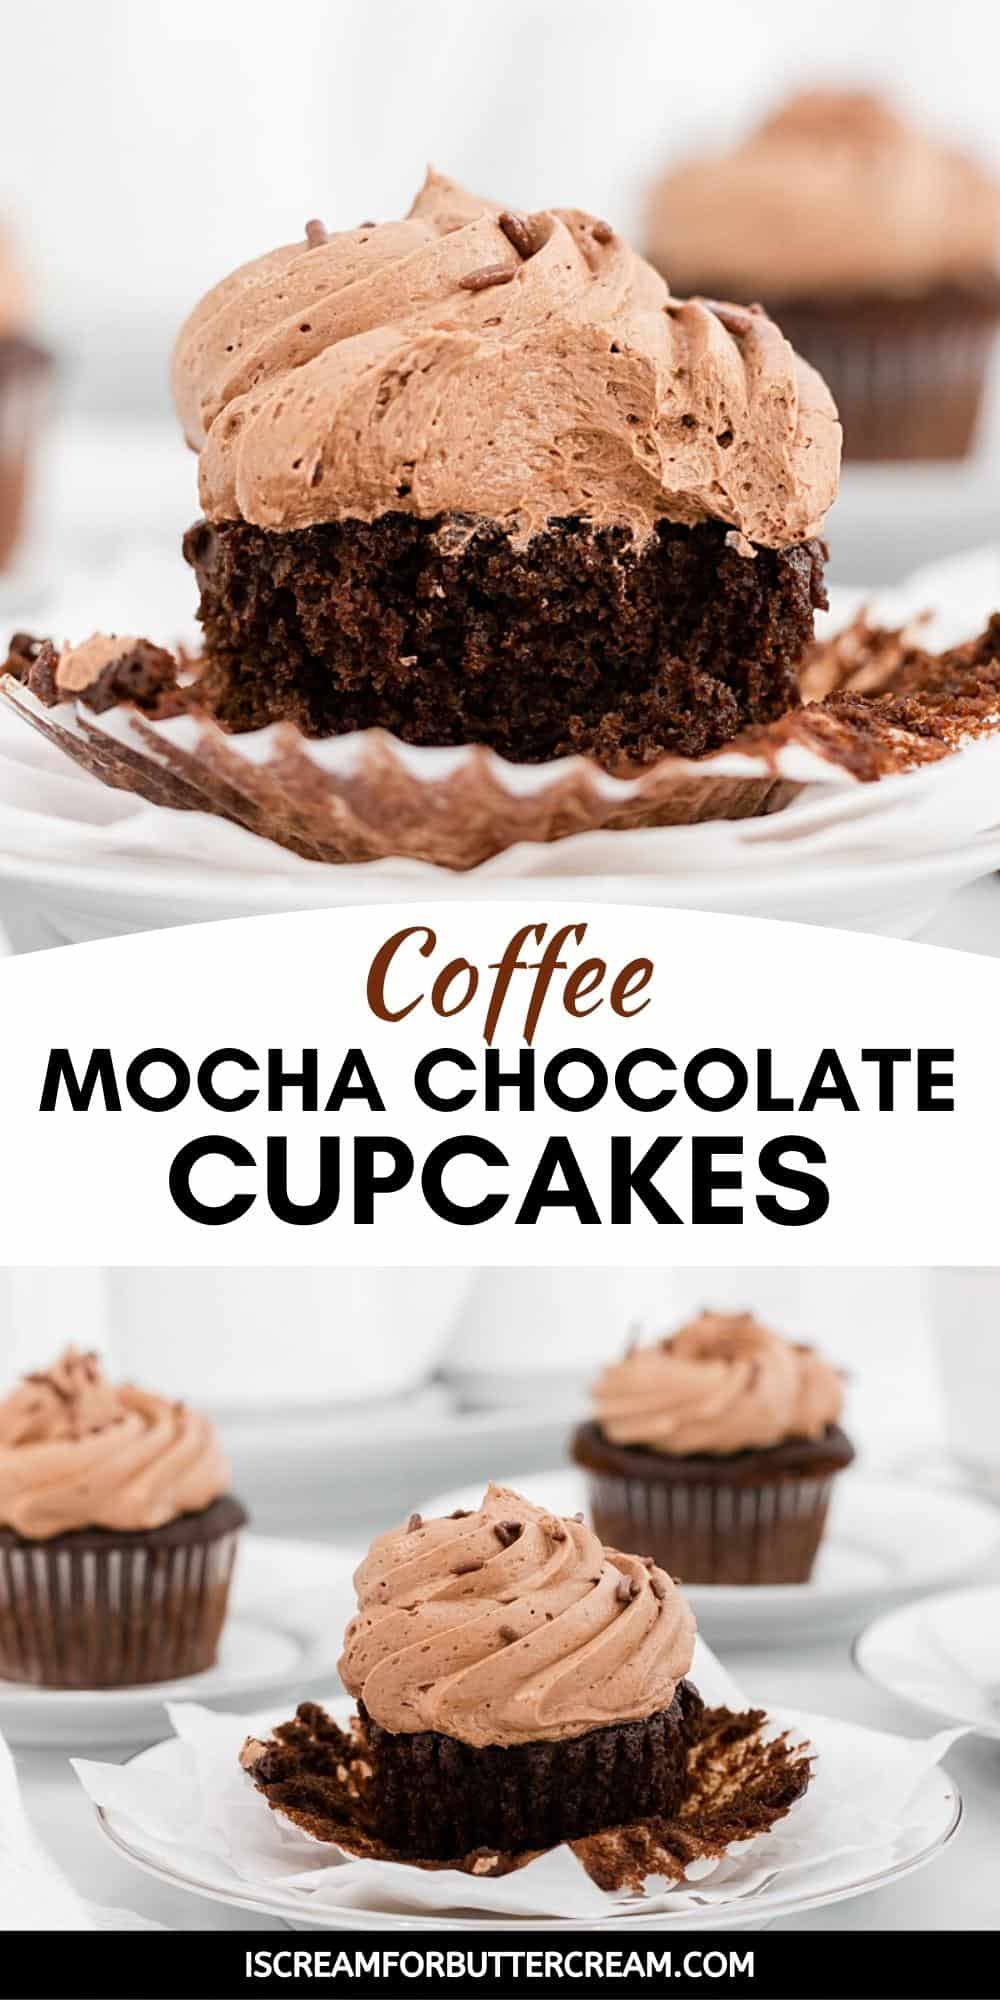 Mocha cupcakes with frosting pin image.